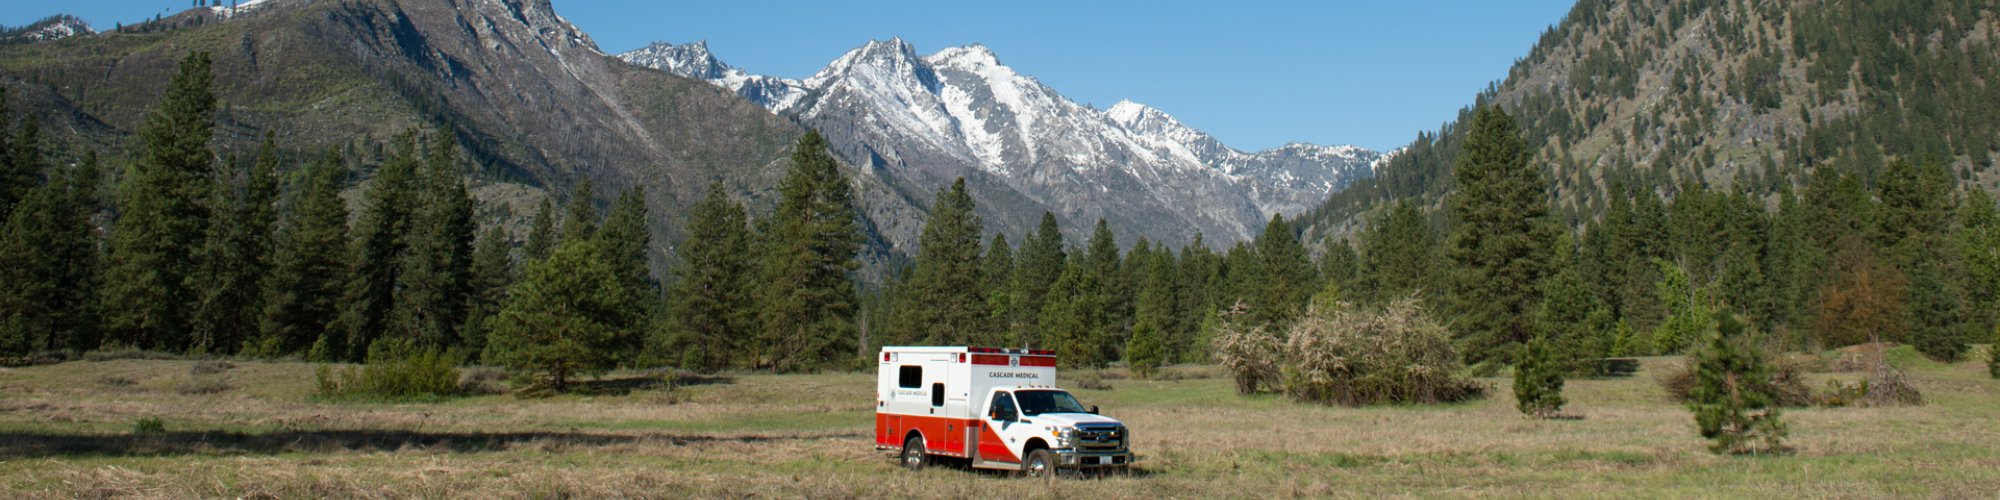 An ambulance parked in a scenic field off of Icicle Road in Leavenworth.